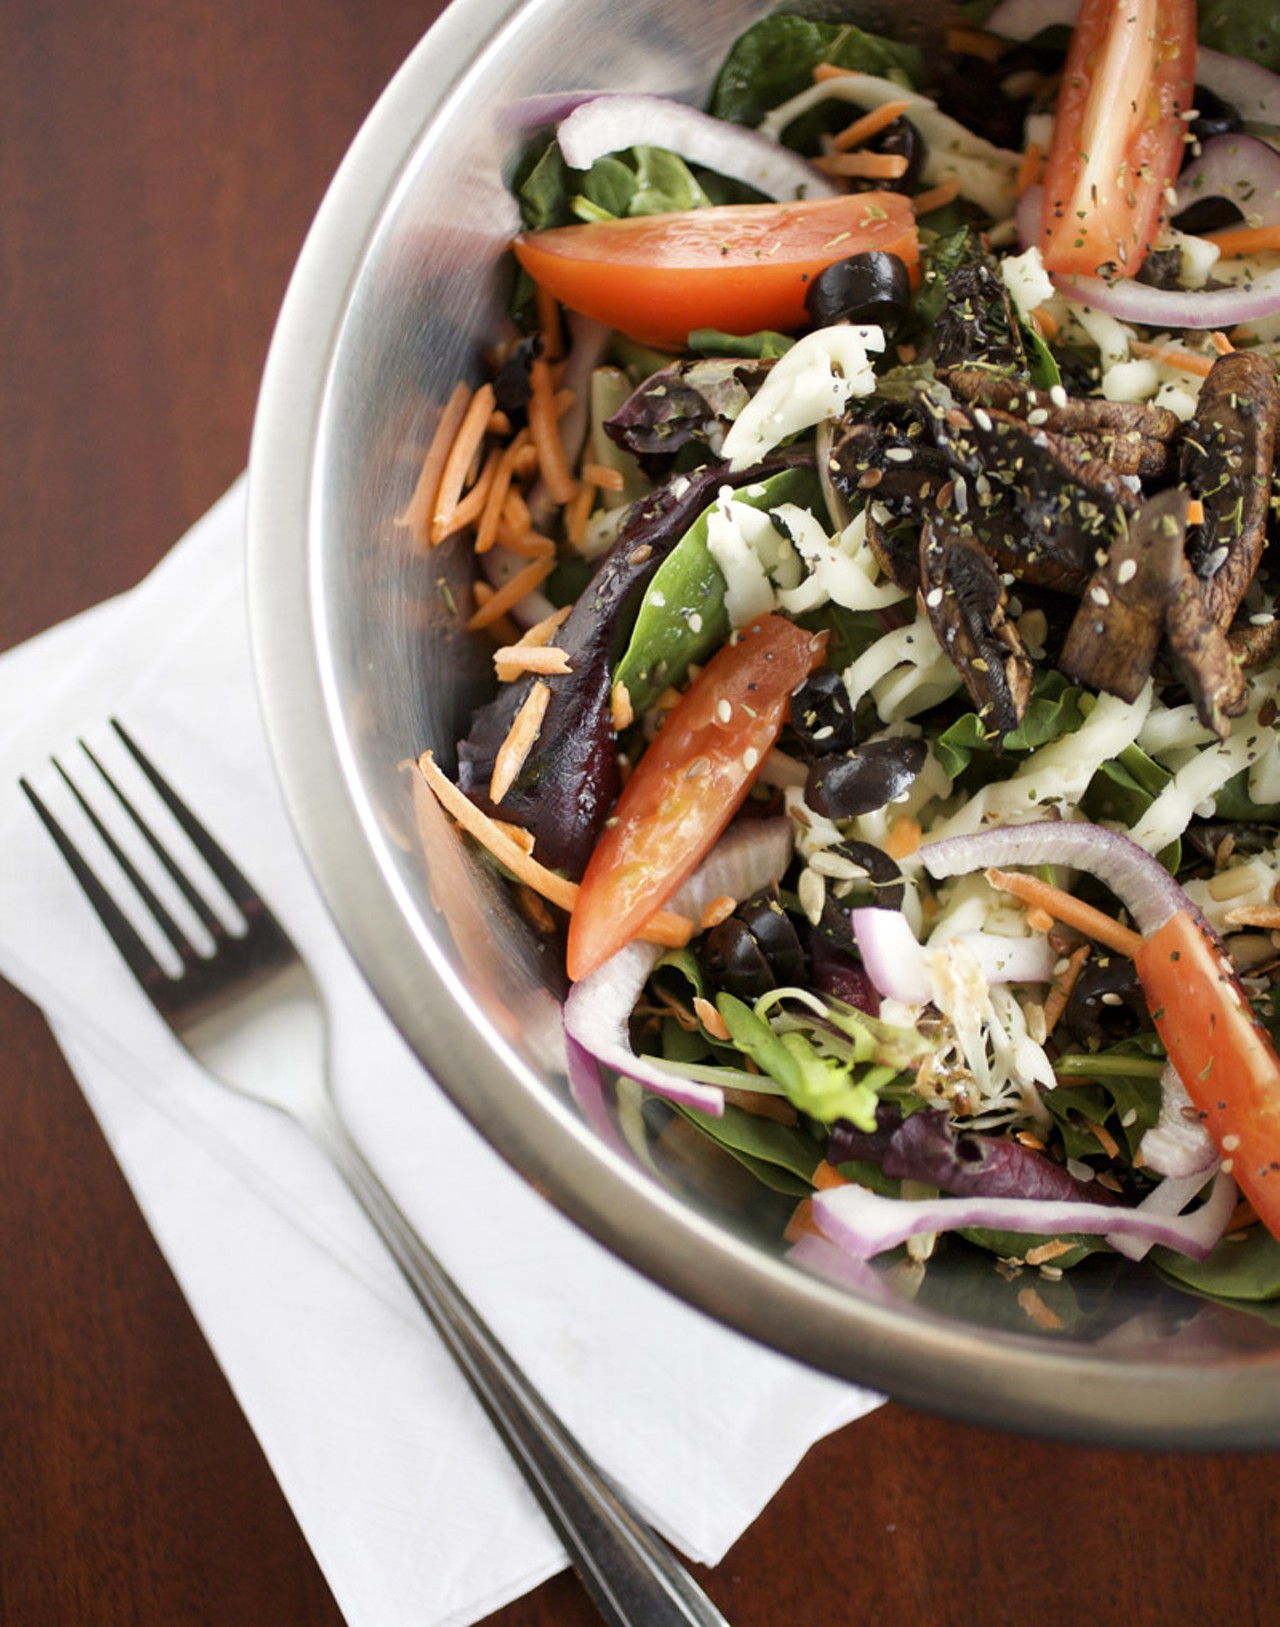 The Hemp Garden Salad is made with a Sring mix, tomatoes, carrots, red onions, black olives, smoked portabella mushrooms and the dressing is the locally owned, Greg's Hemp Oil vinaigrette.